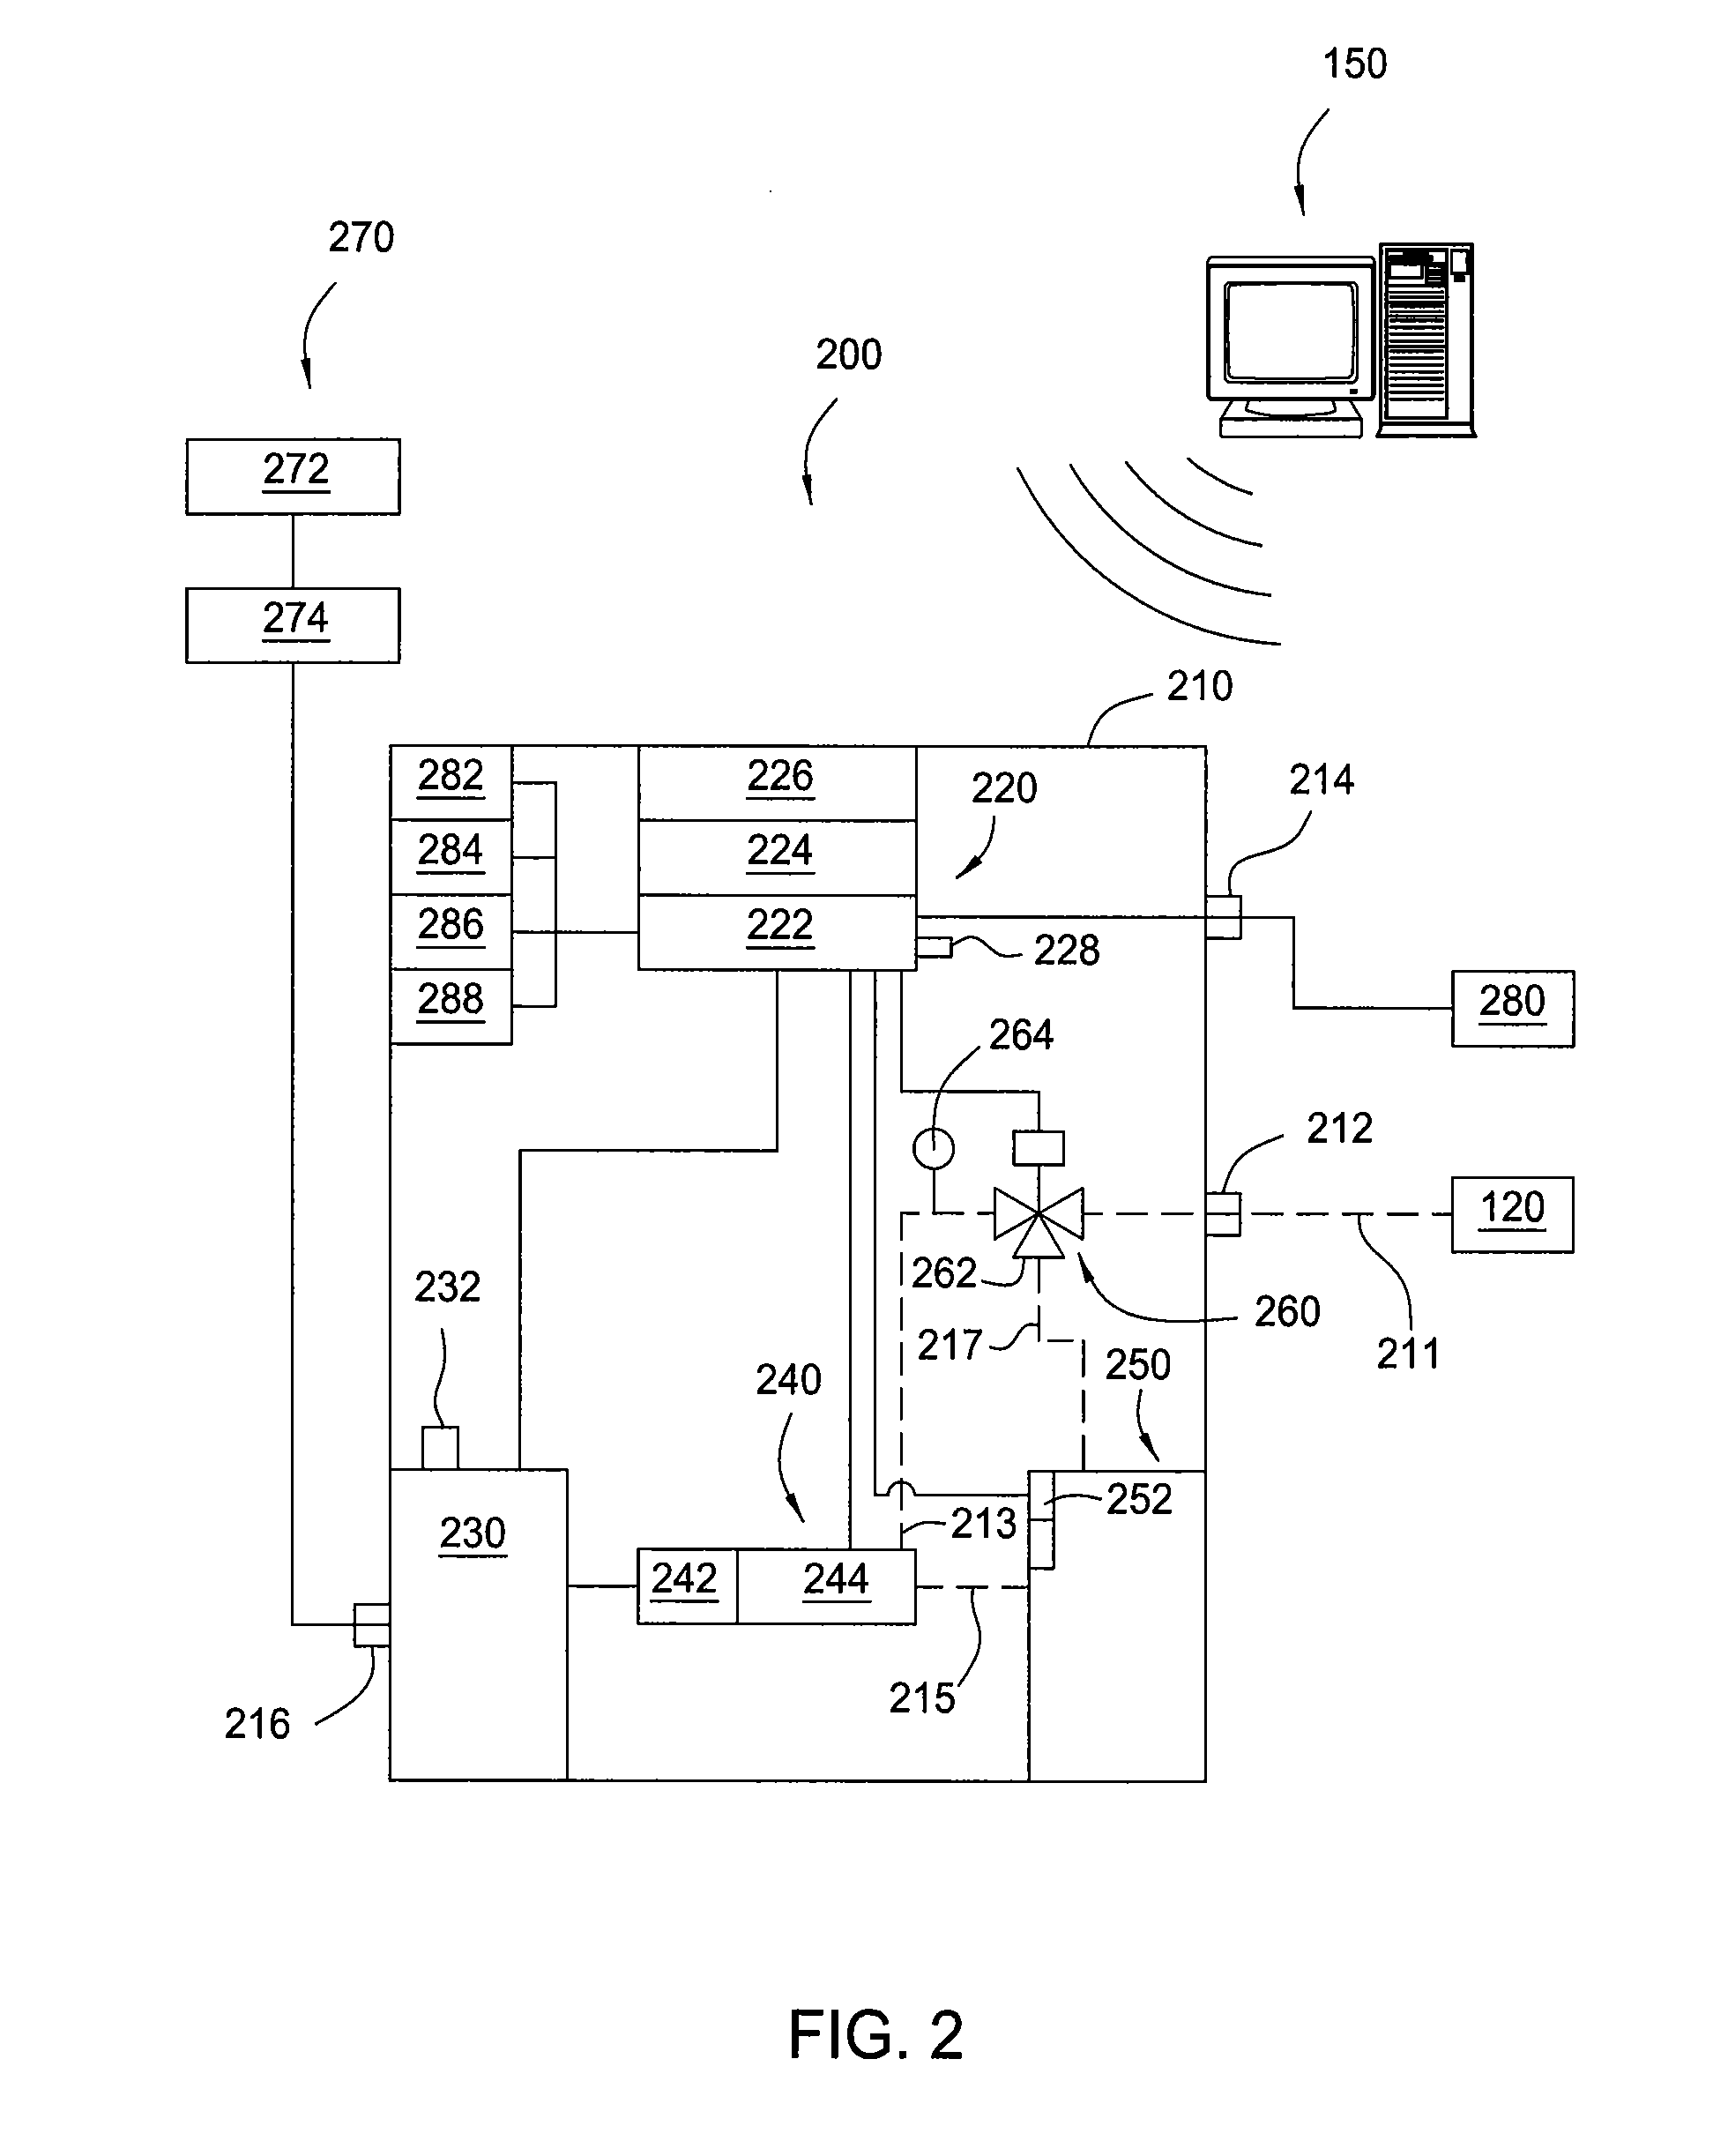 Safety valve control system and method of use